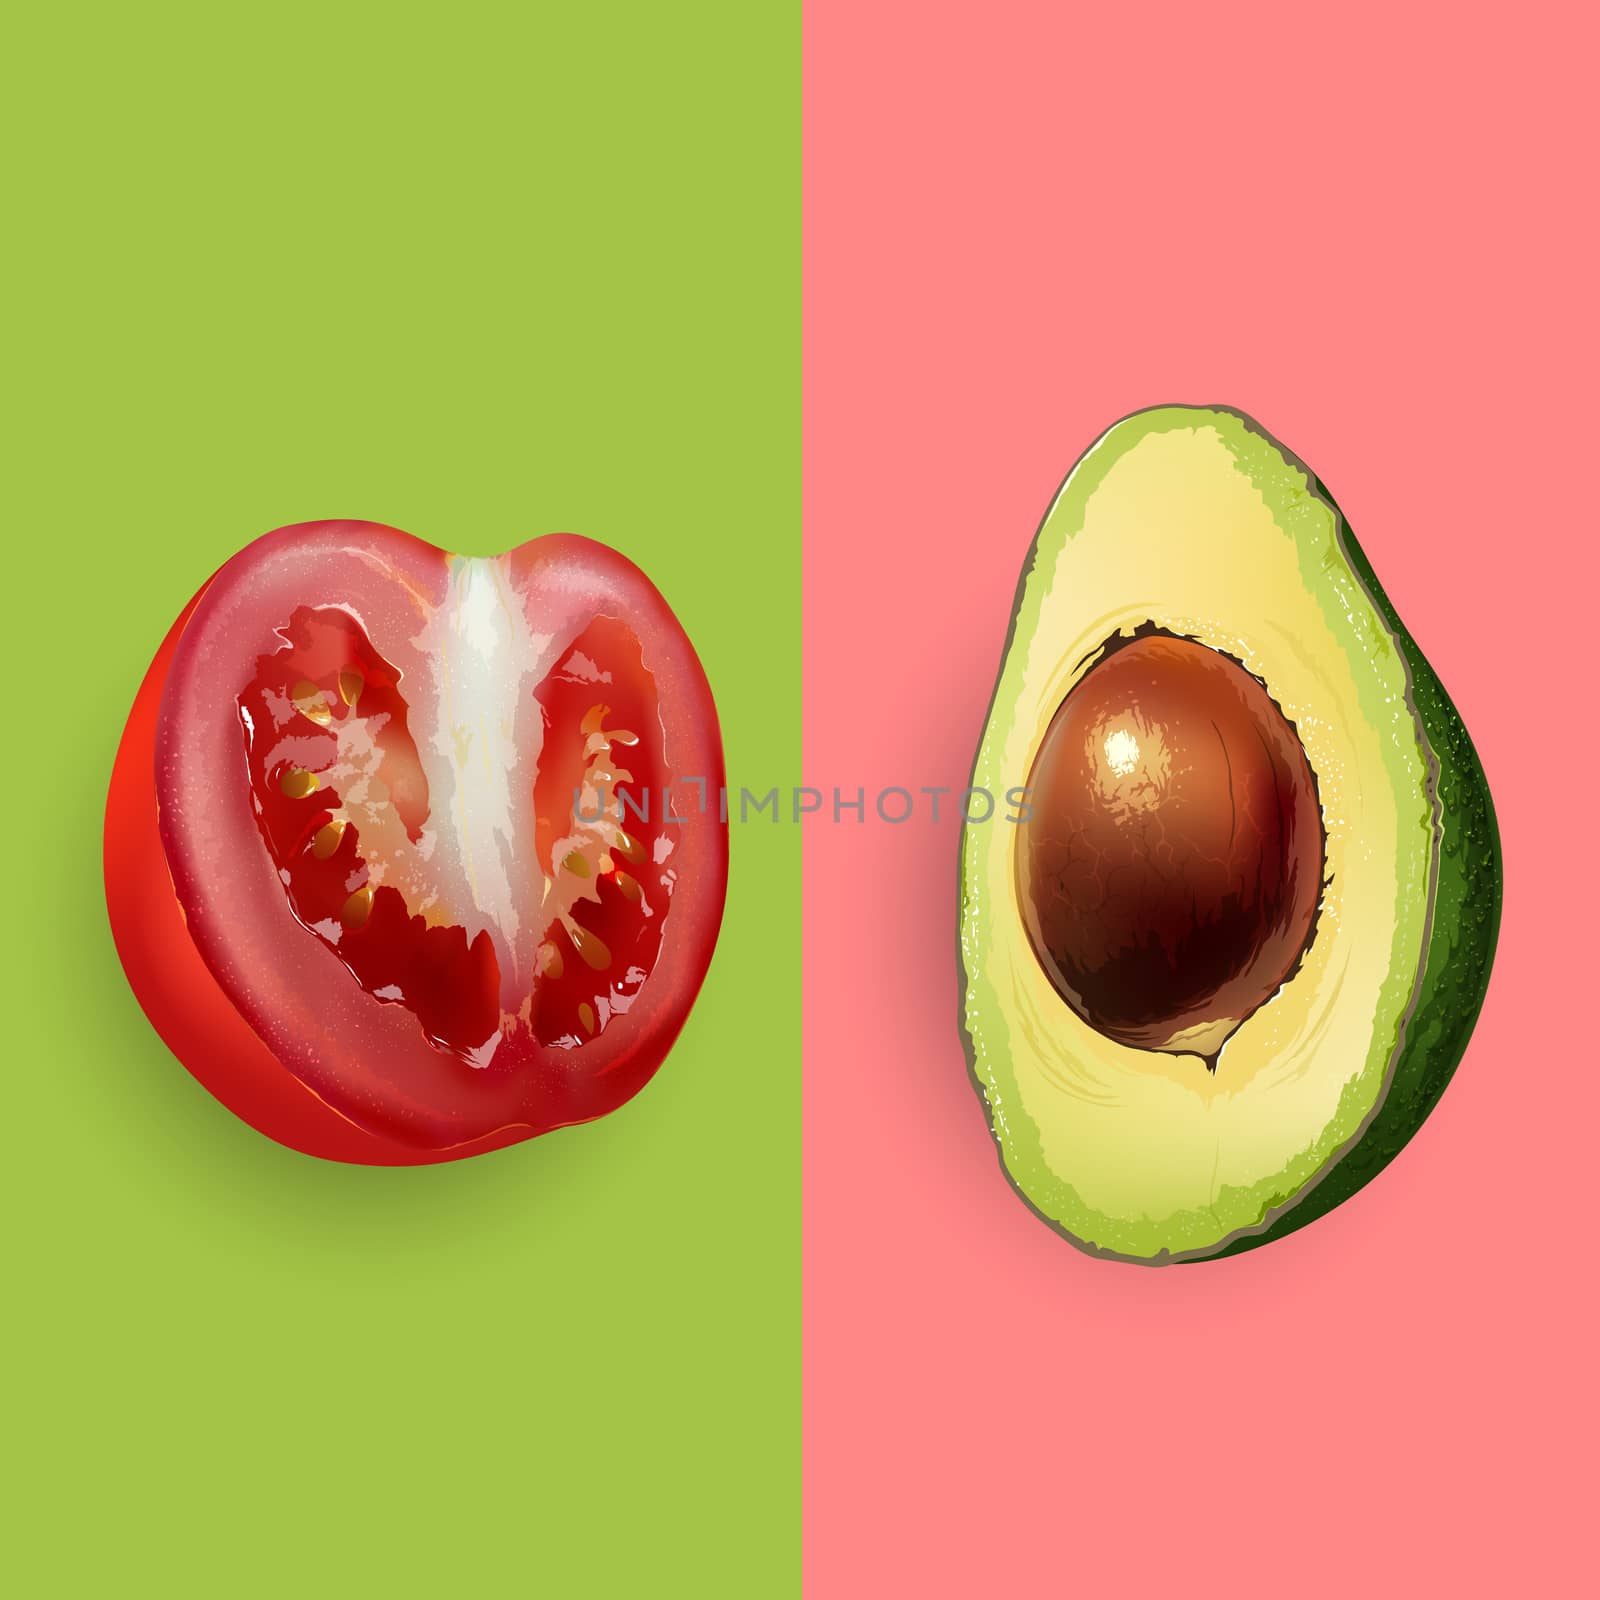 Avocado and tomato illustration by ConceptCafe